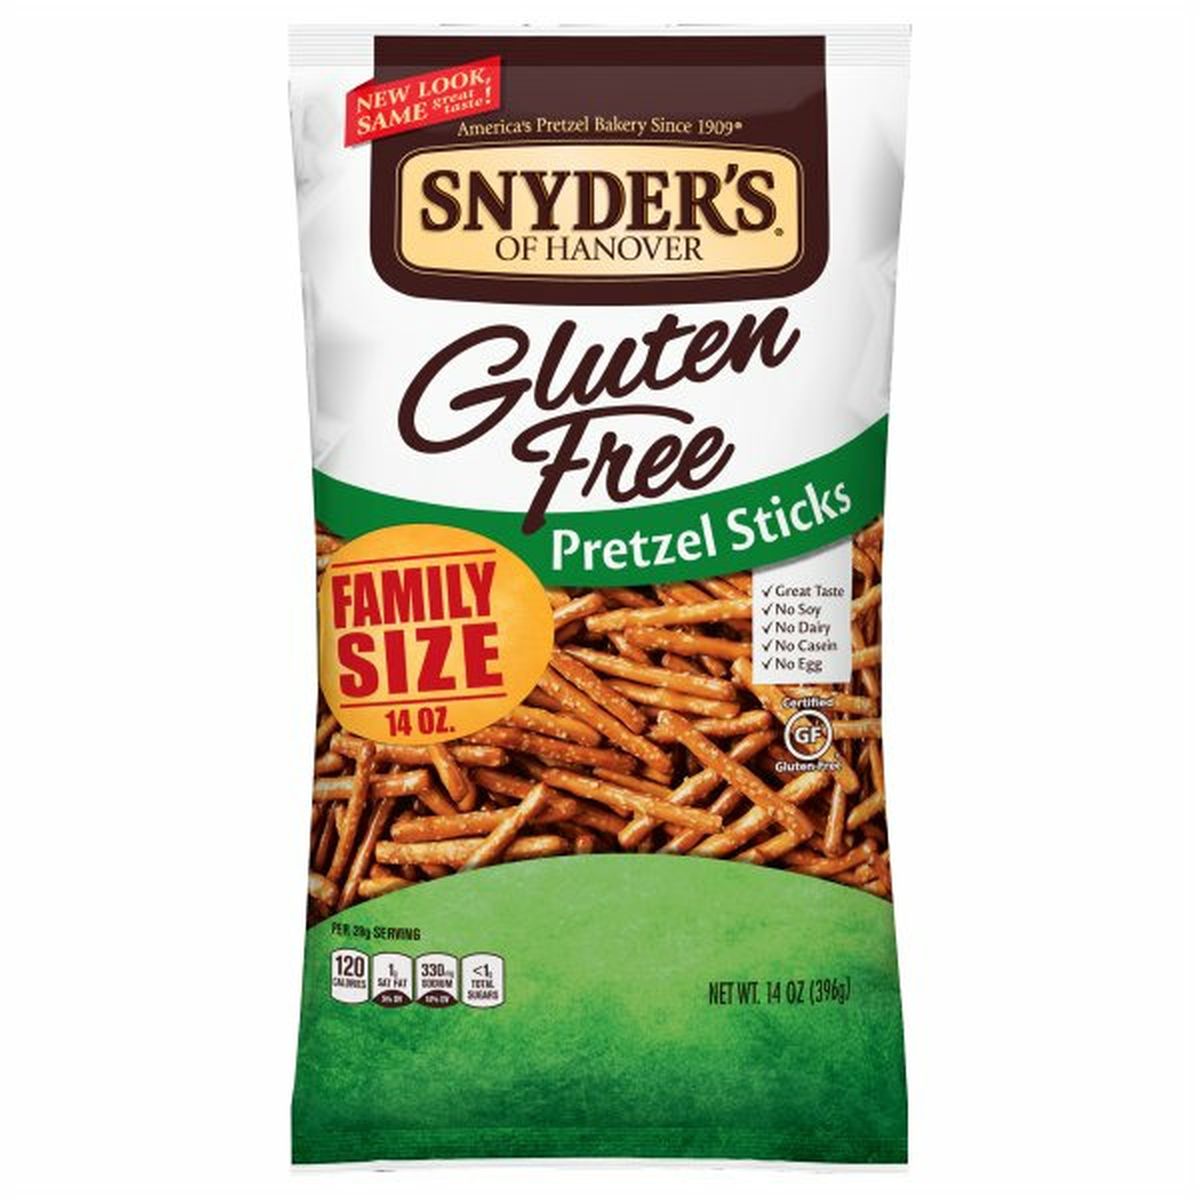 Calories in Snyder's of Hanovers Pretzel Sticks, Gluten Free, Family Size